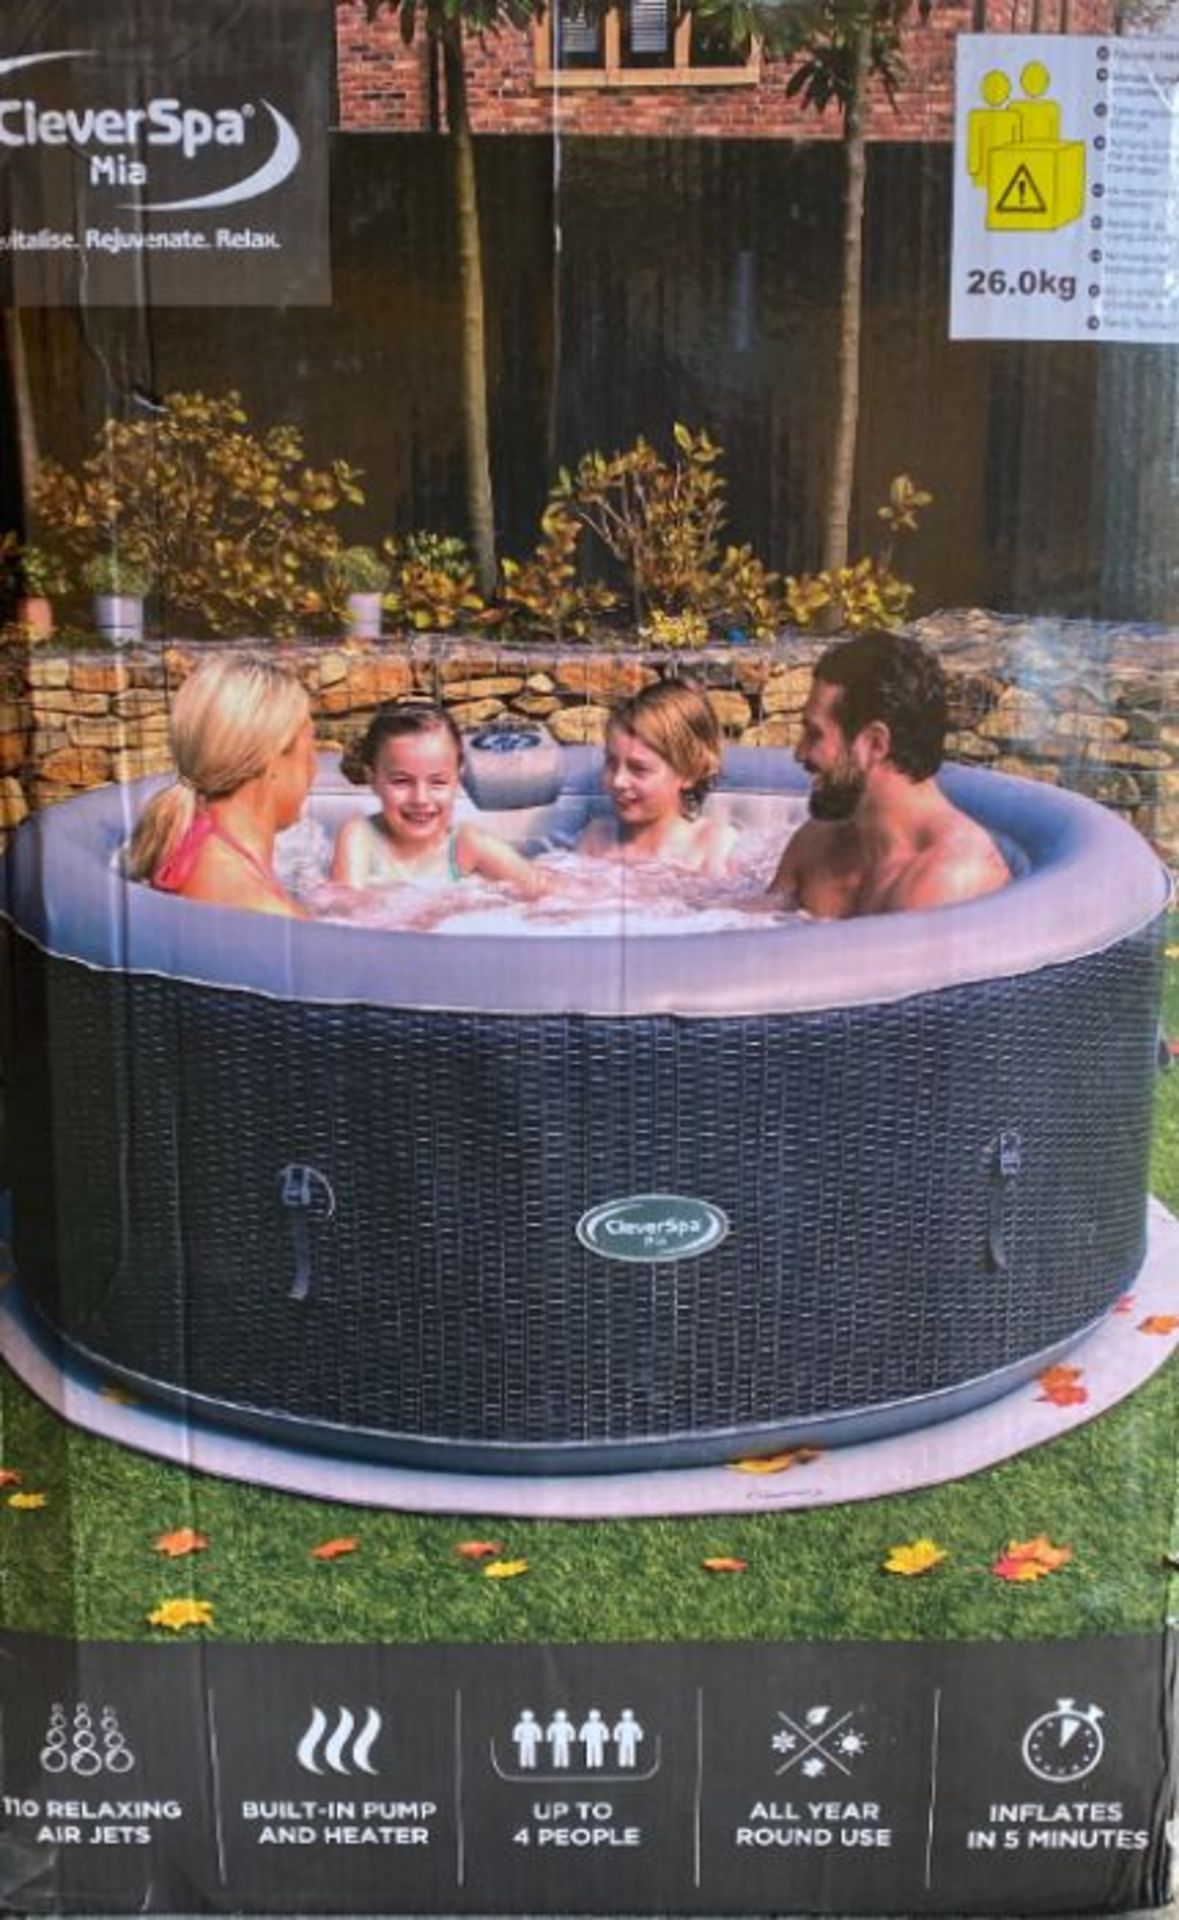 1 x CLEVERSPA MIA 4 PERSON HOT TUB - RRP £413.70 - Image 3 of 3